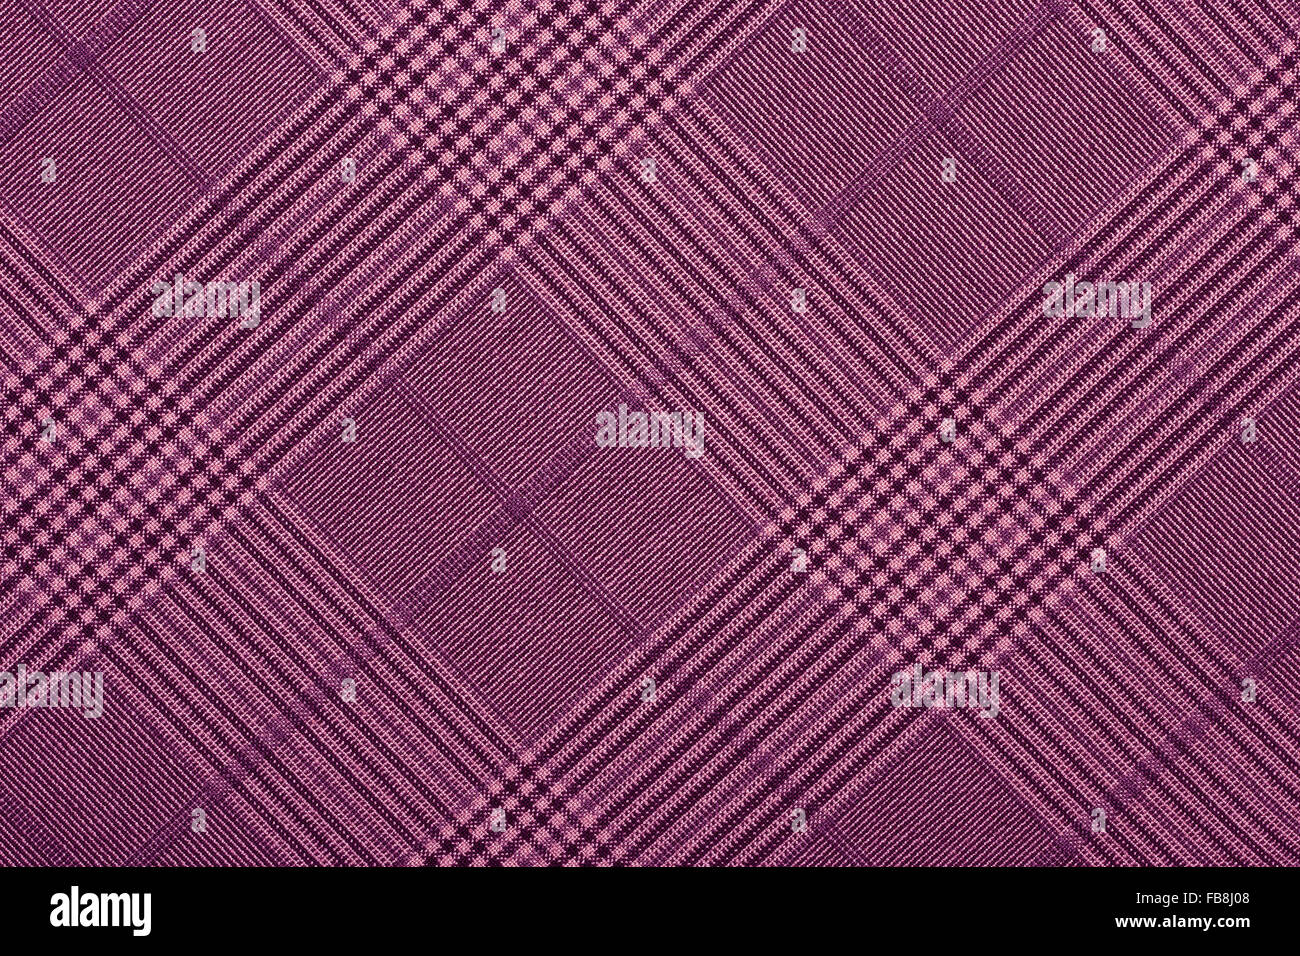 Purple material in geometric patterns, a background or texture Stock Photo